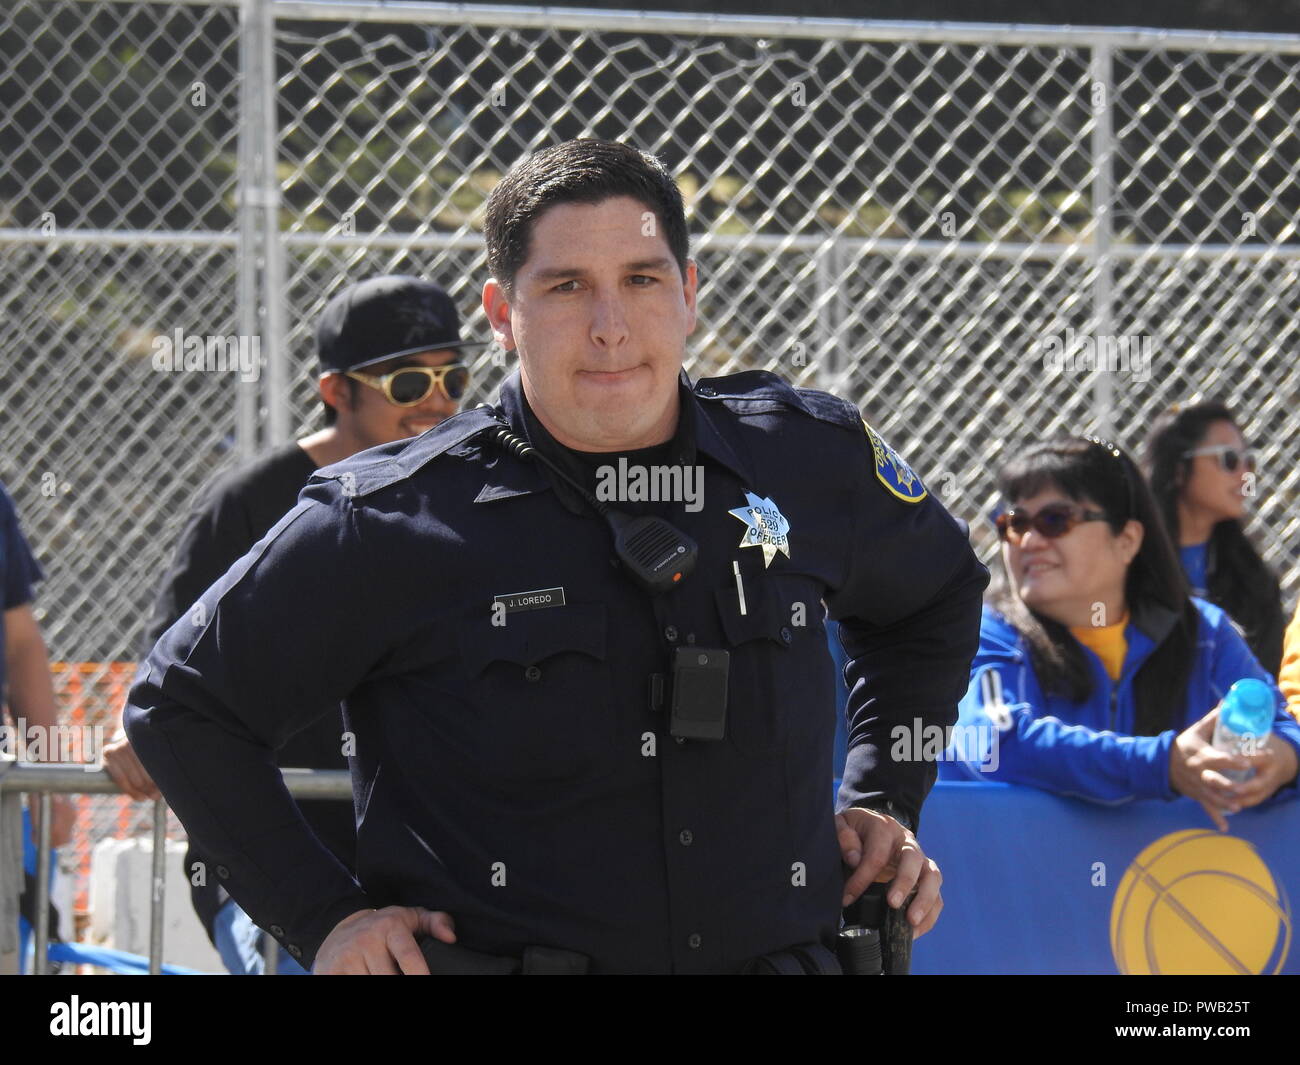 Oakland police Officer Jacob Loredo provides security at the Golden State Warriors victory parade in Oakland on June 15, 2017. Stock Photo